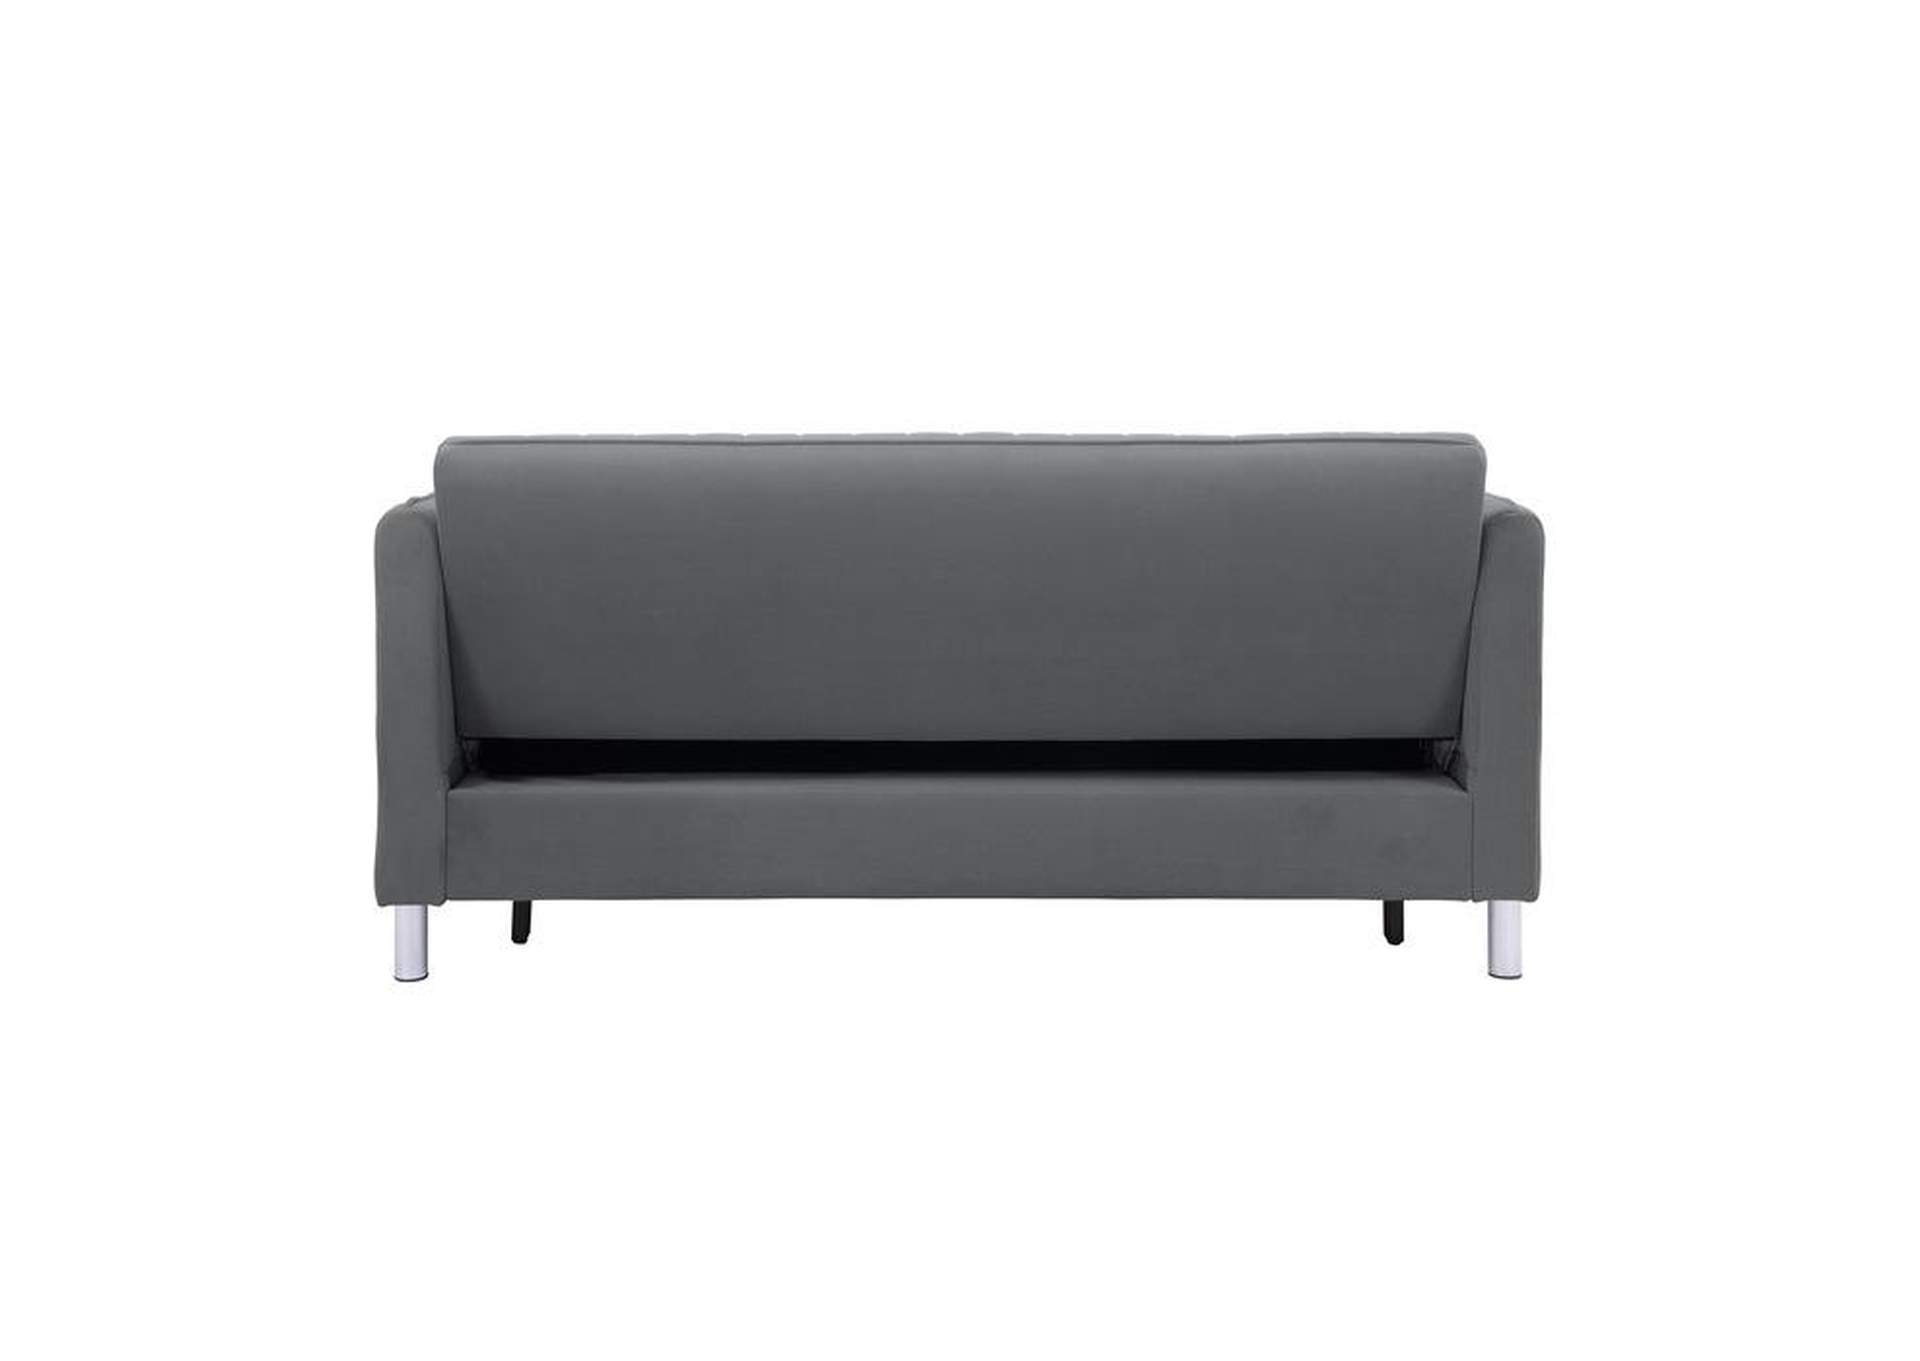 Greenway Convertible Studio Sofa with Pull-out Bed,Homelegance